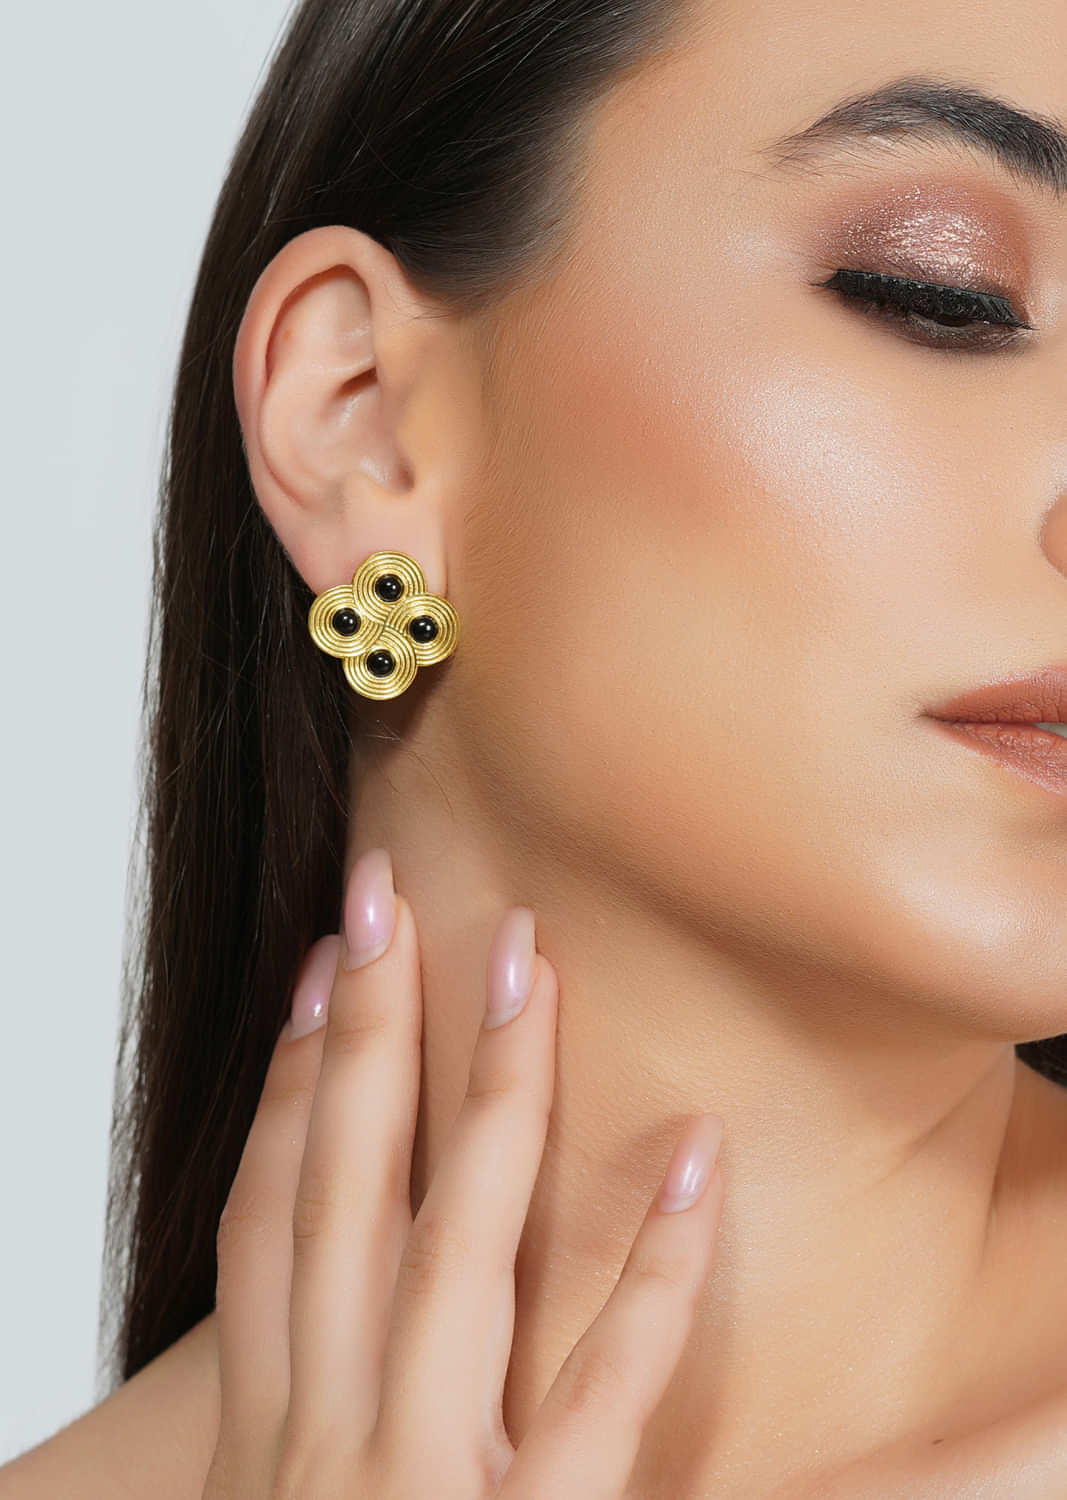 Gold Plated Stud Earrings Embellished With Black Onyx Stones